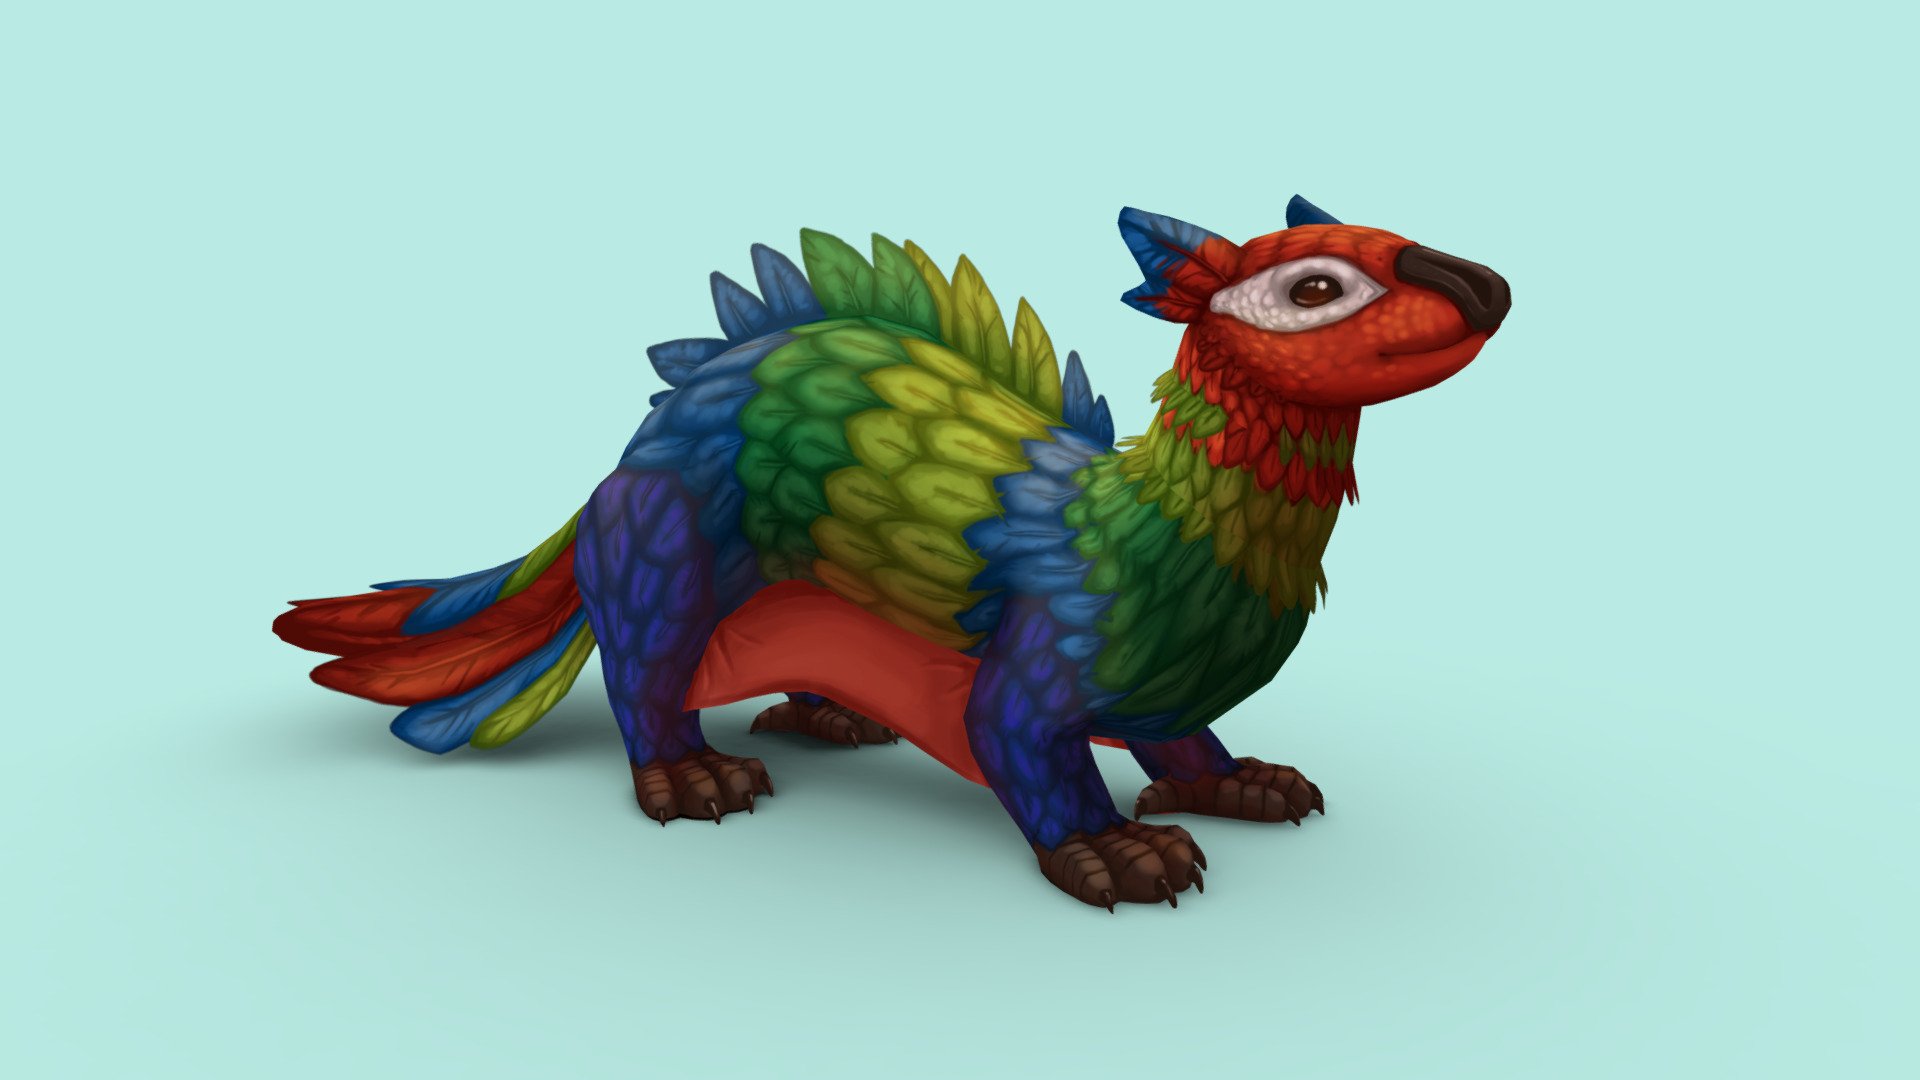 This is a Ferrether, a ferret/parrot/sugar-glider combo creature for an indie 3D platformer I am currently developing. More info here! https://www.youtube.com/watch?v=PBU-18Z8SQk

Created with Blender and 3D Coat! - Ferrether - 3D model by inkrose 3d model